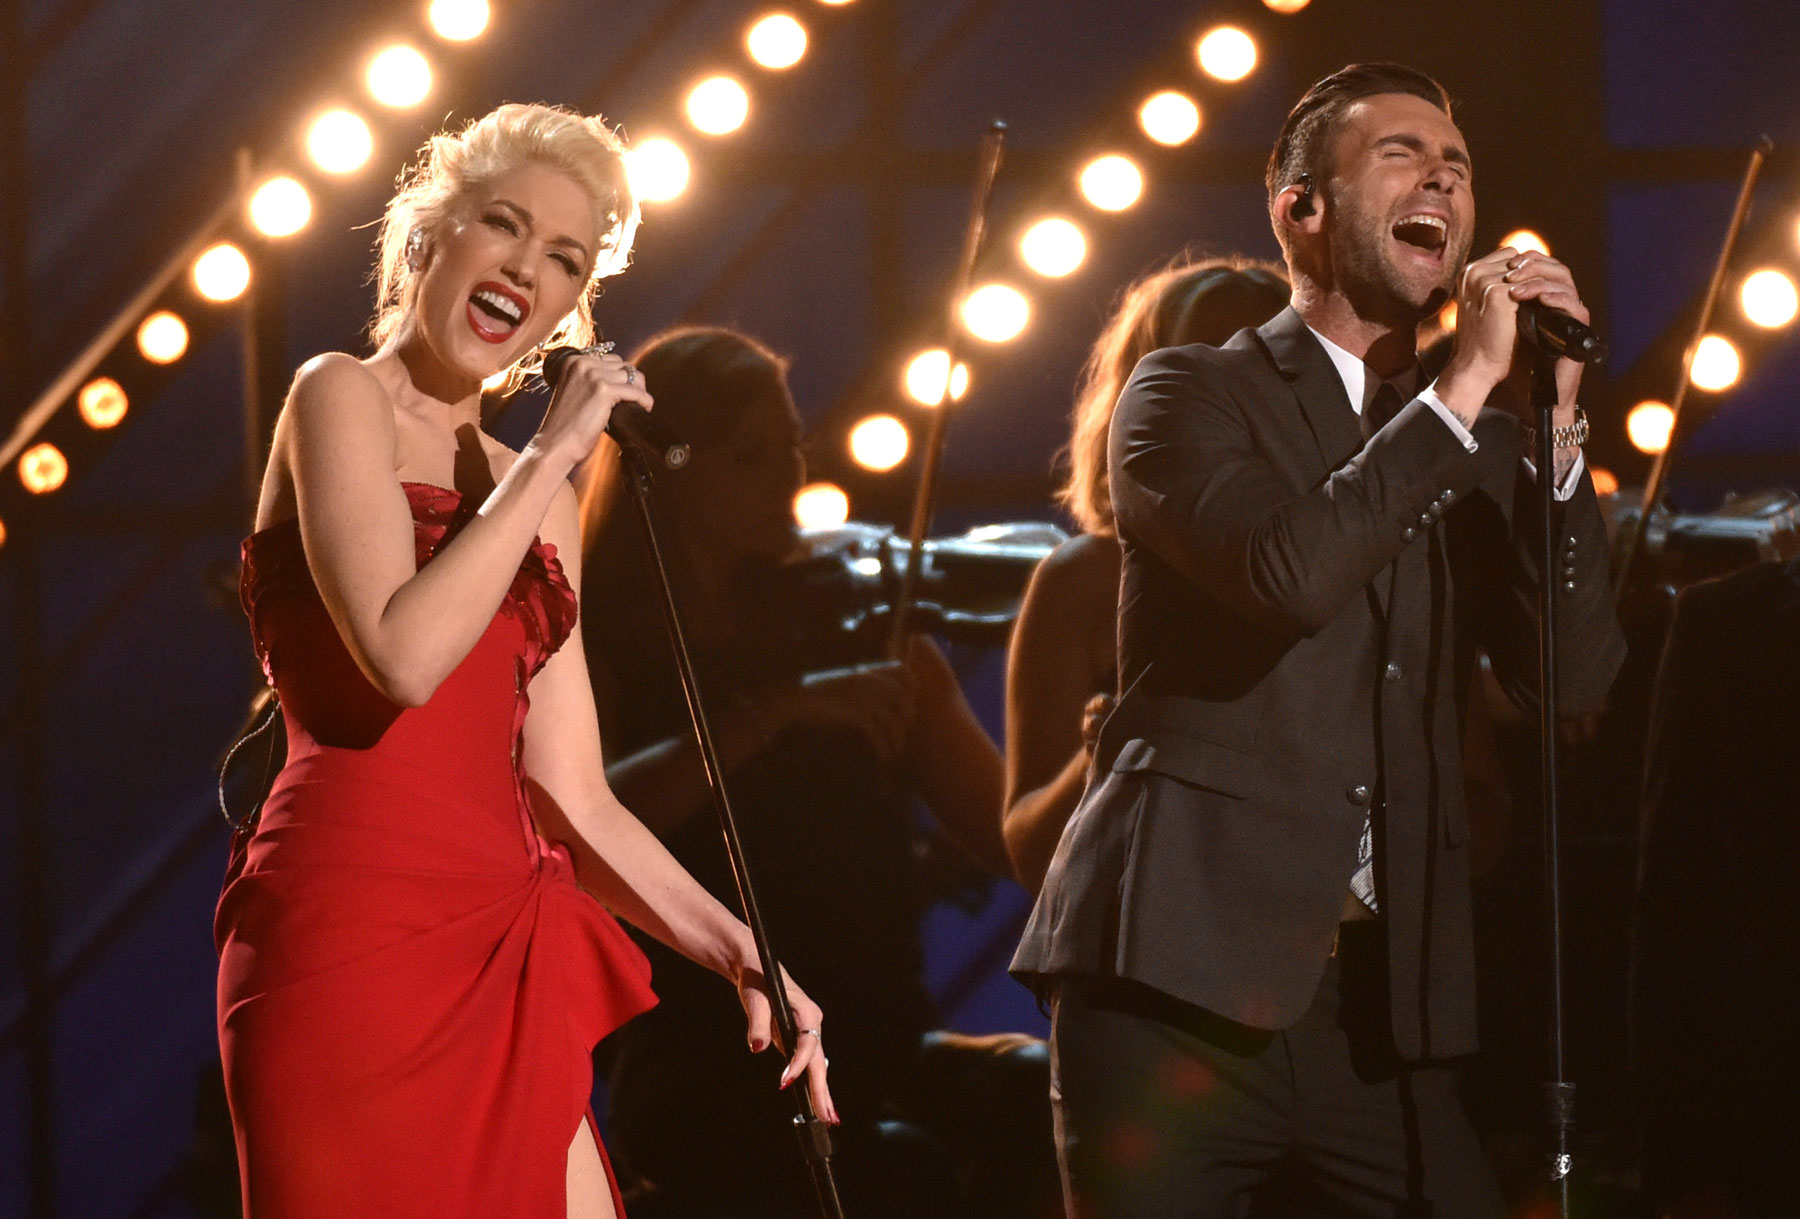 Gwen Stefani, left, and Adam Levine perform at the 57th annual Grammy Awards on Sunday, Feb. 8, 2015, in Los Angeles. (Photo by John Shearer/Invision/AP)